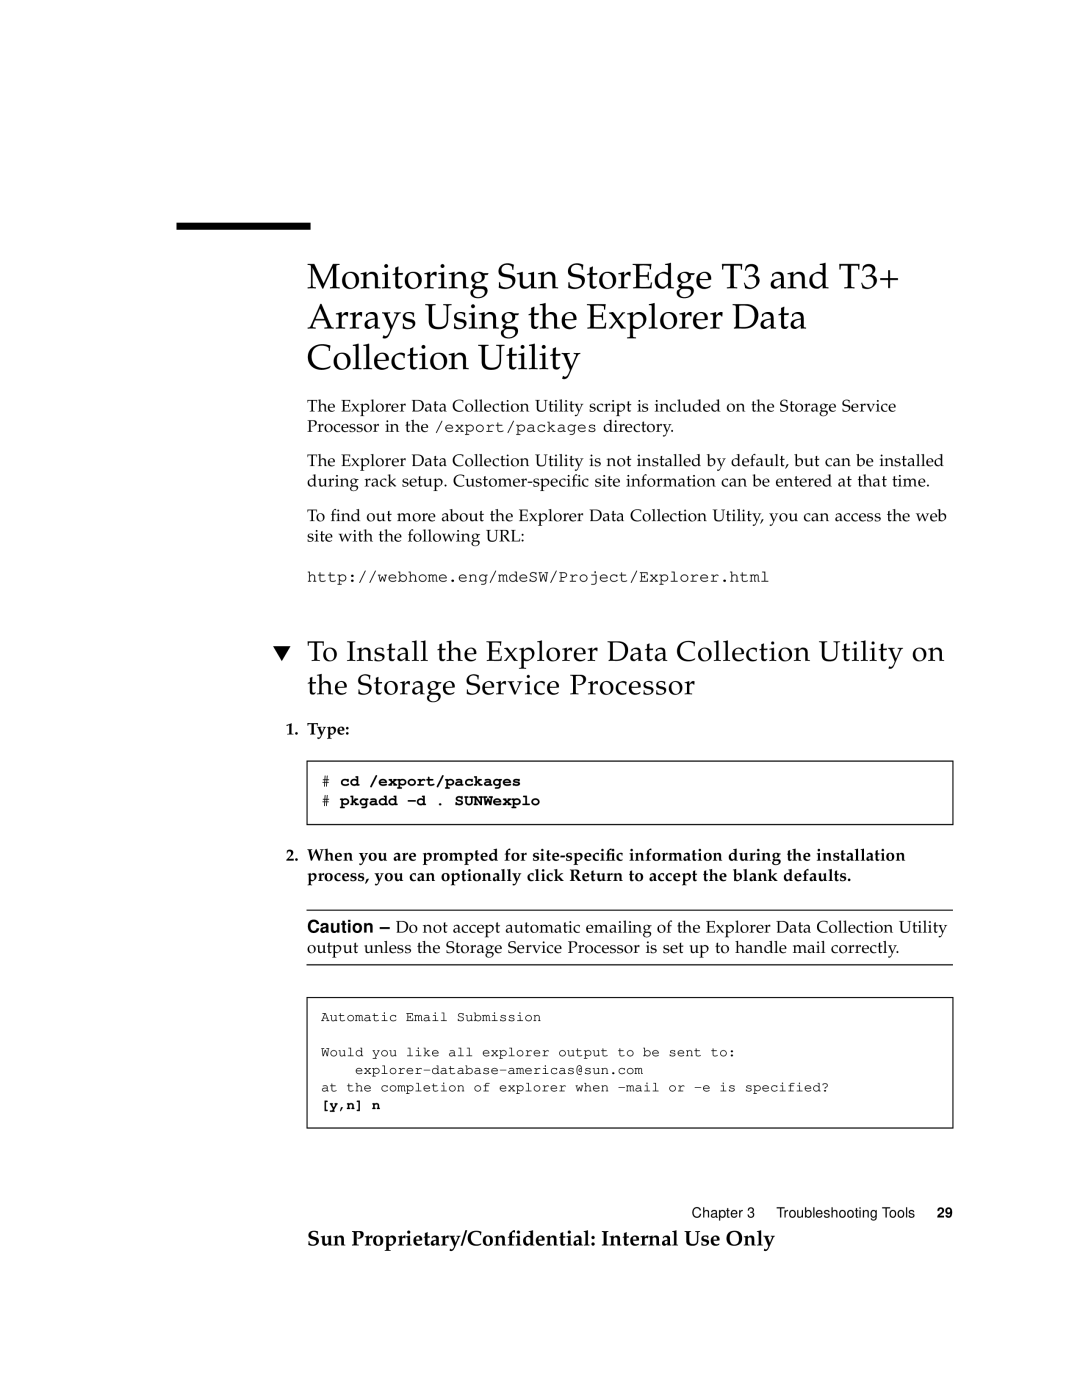 Sun Microsystems 6900, 3900 manual Monitoring Sun StorEdge T3 and T3+ Arrays Using the Explorer Data, Collection Utility 